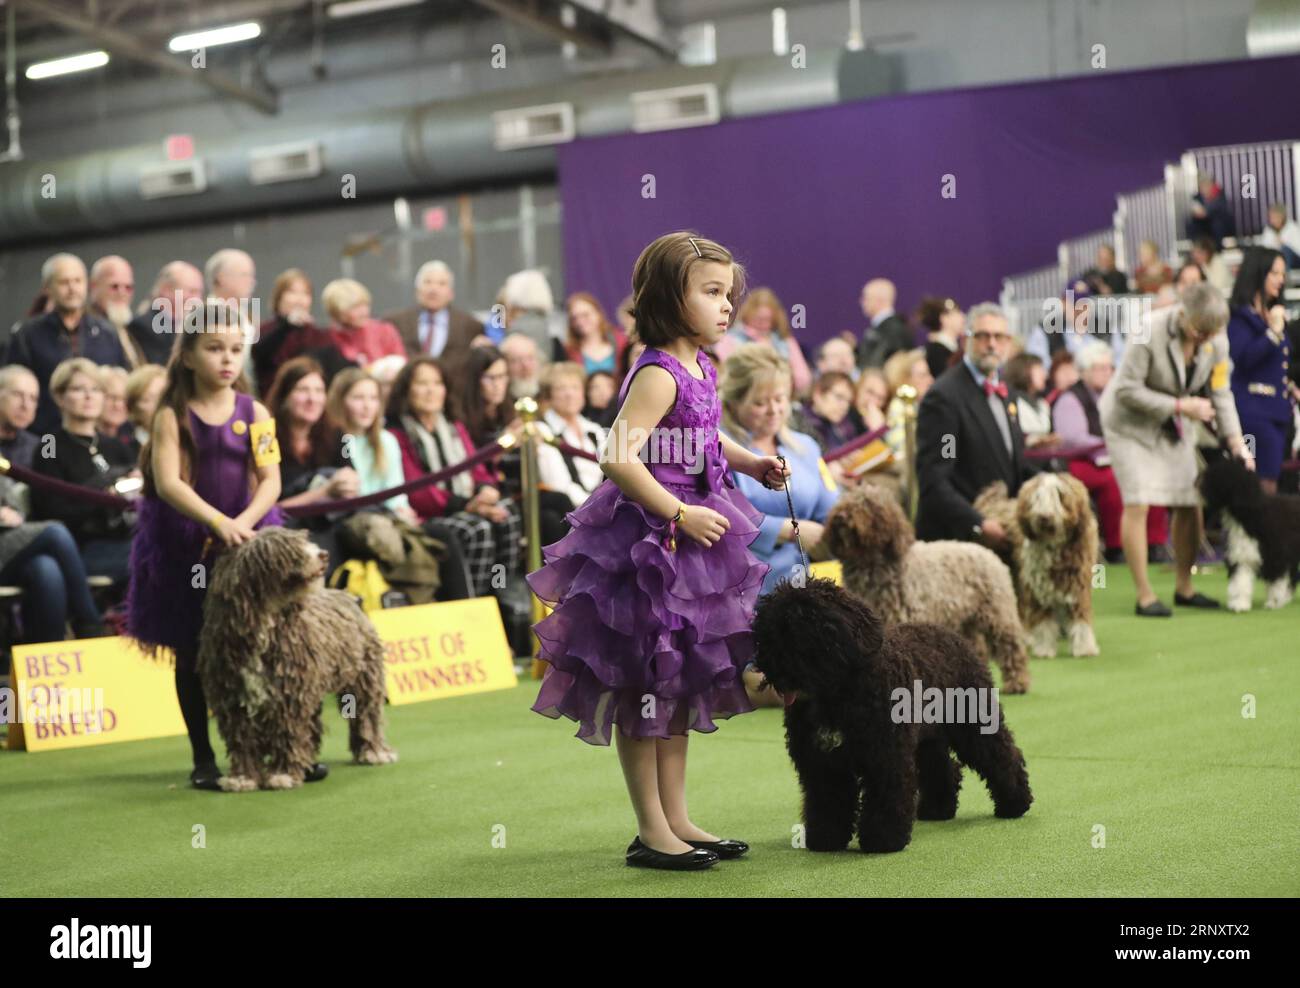 (180213) -- NEW YORK, Feb. 13, 2018 -- Dogs are seen during the Confirmation competition at the 2018 Westminster Kennel Club Dog Show in New York, the United States, Feb. 12, 2018. Around 2800 dogs of over 200 breeds from all over the world participated in the show this year. ) (zy) U.S.-NEW YORK-DOG SHOW WangxYing PUBLICATIONxNOTxINxCHN Stock Photo